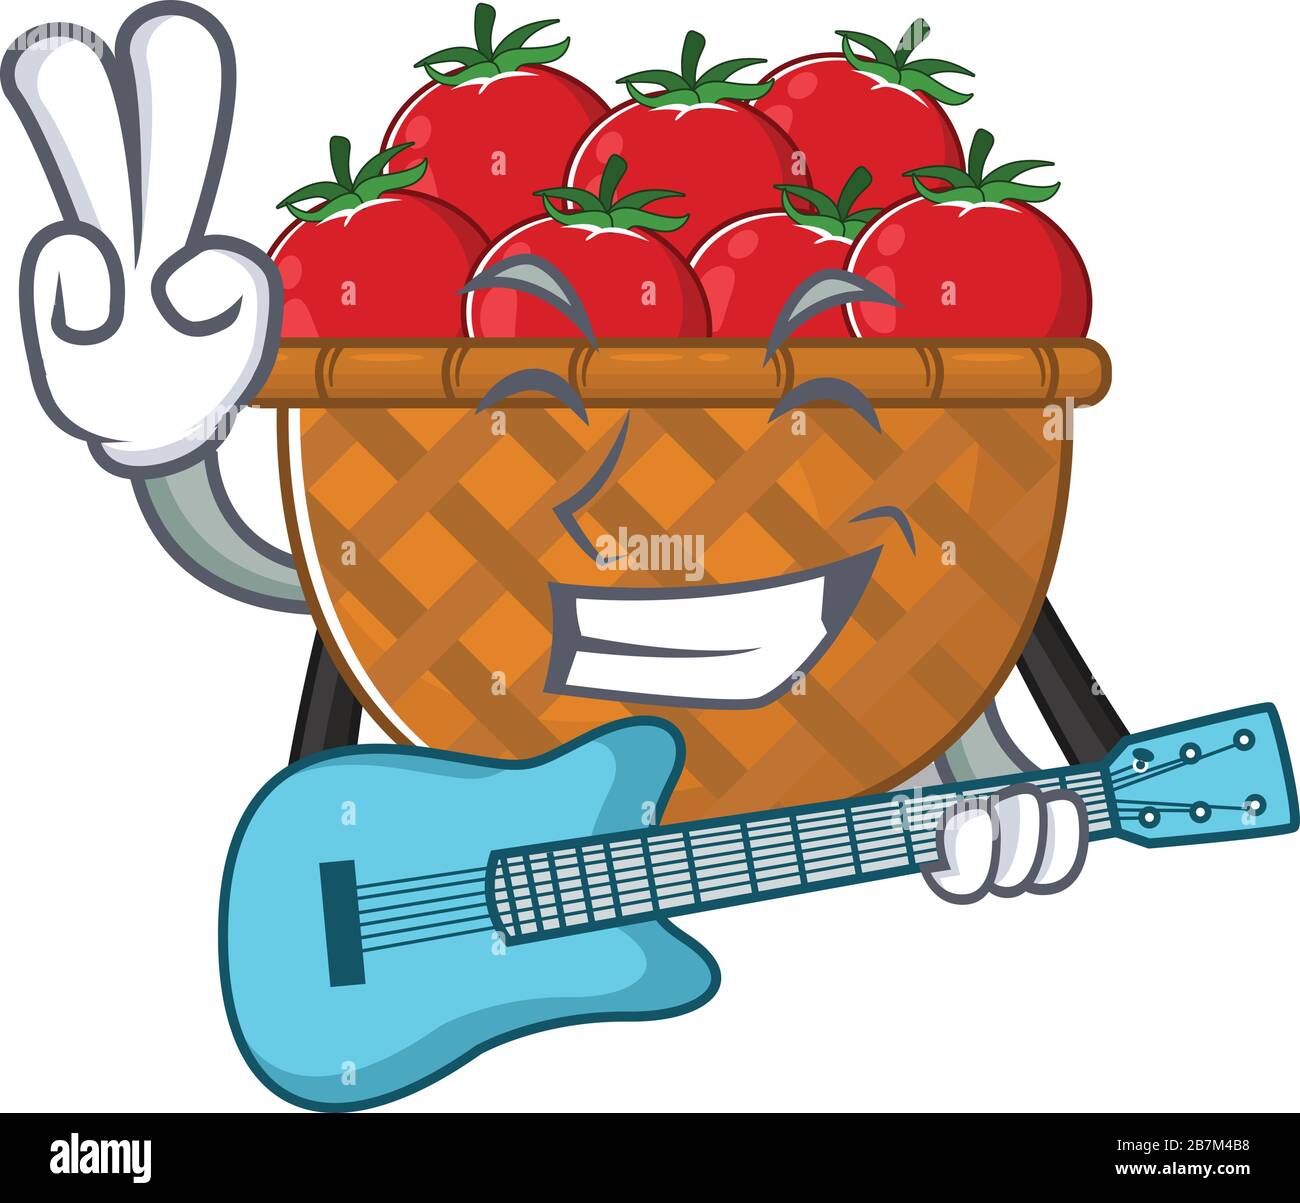 Supper cool tomato basket cartoon playing a guitar Stock Vector